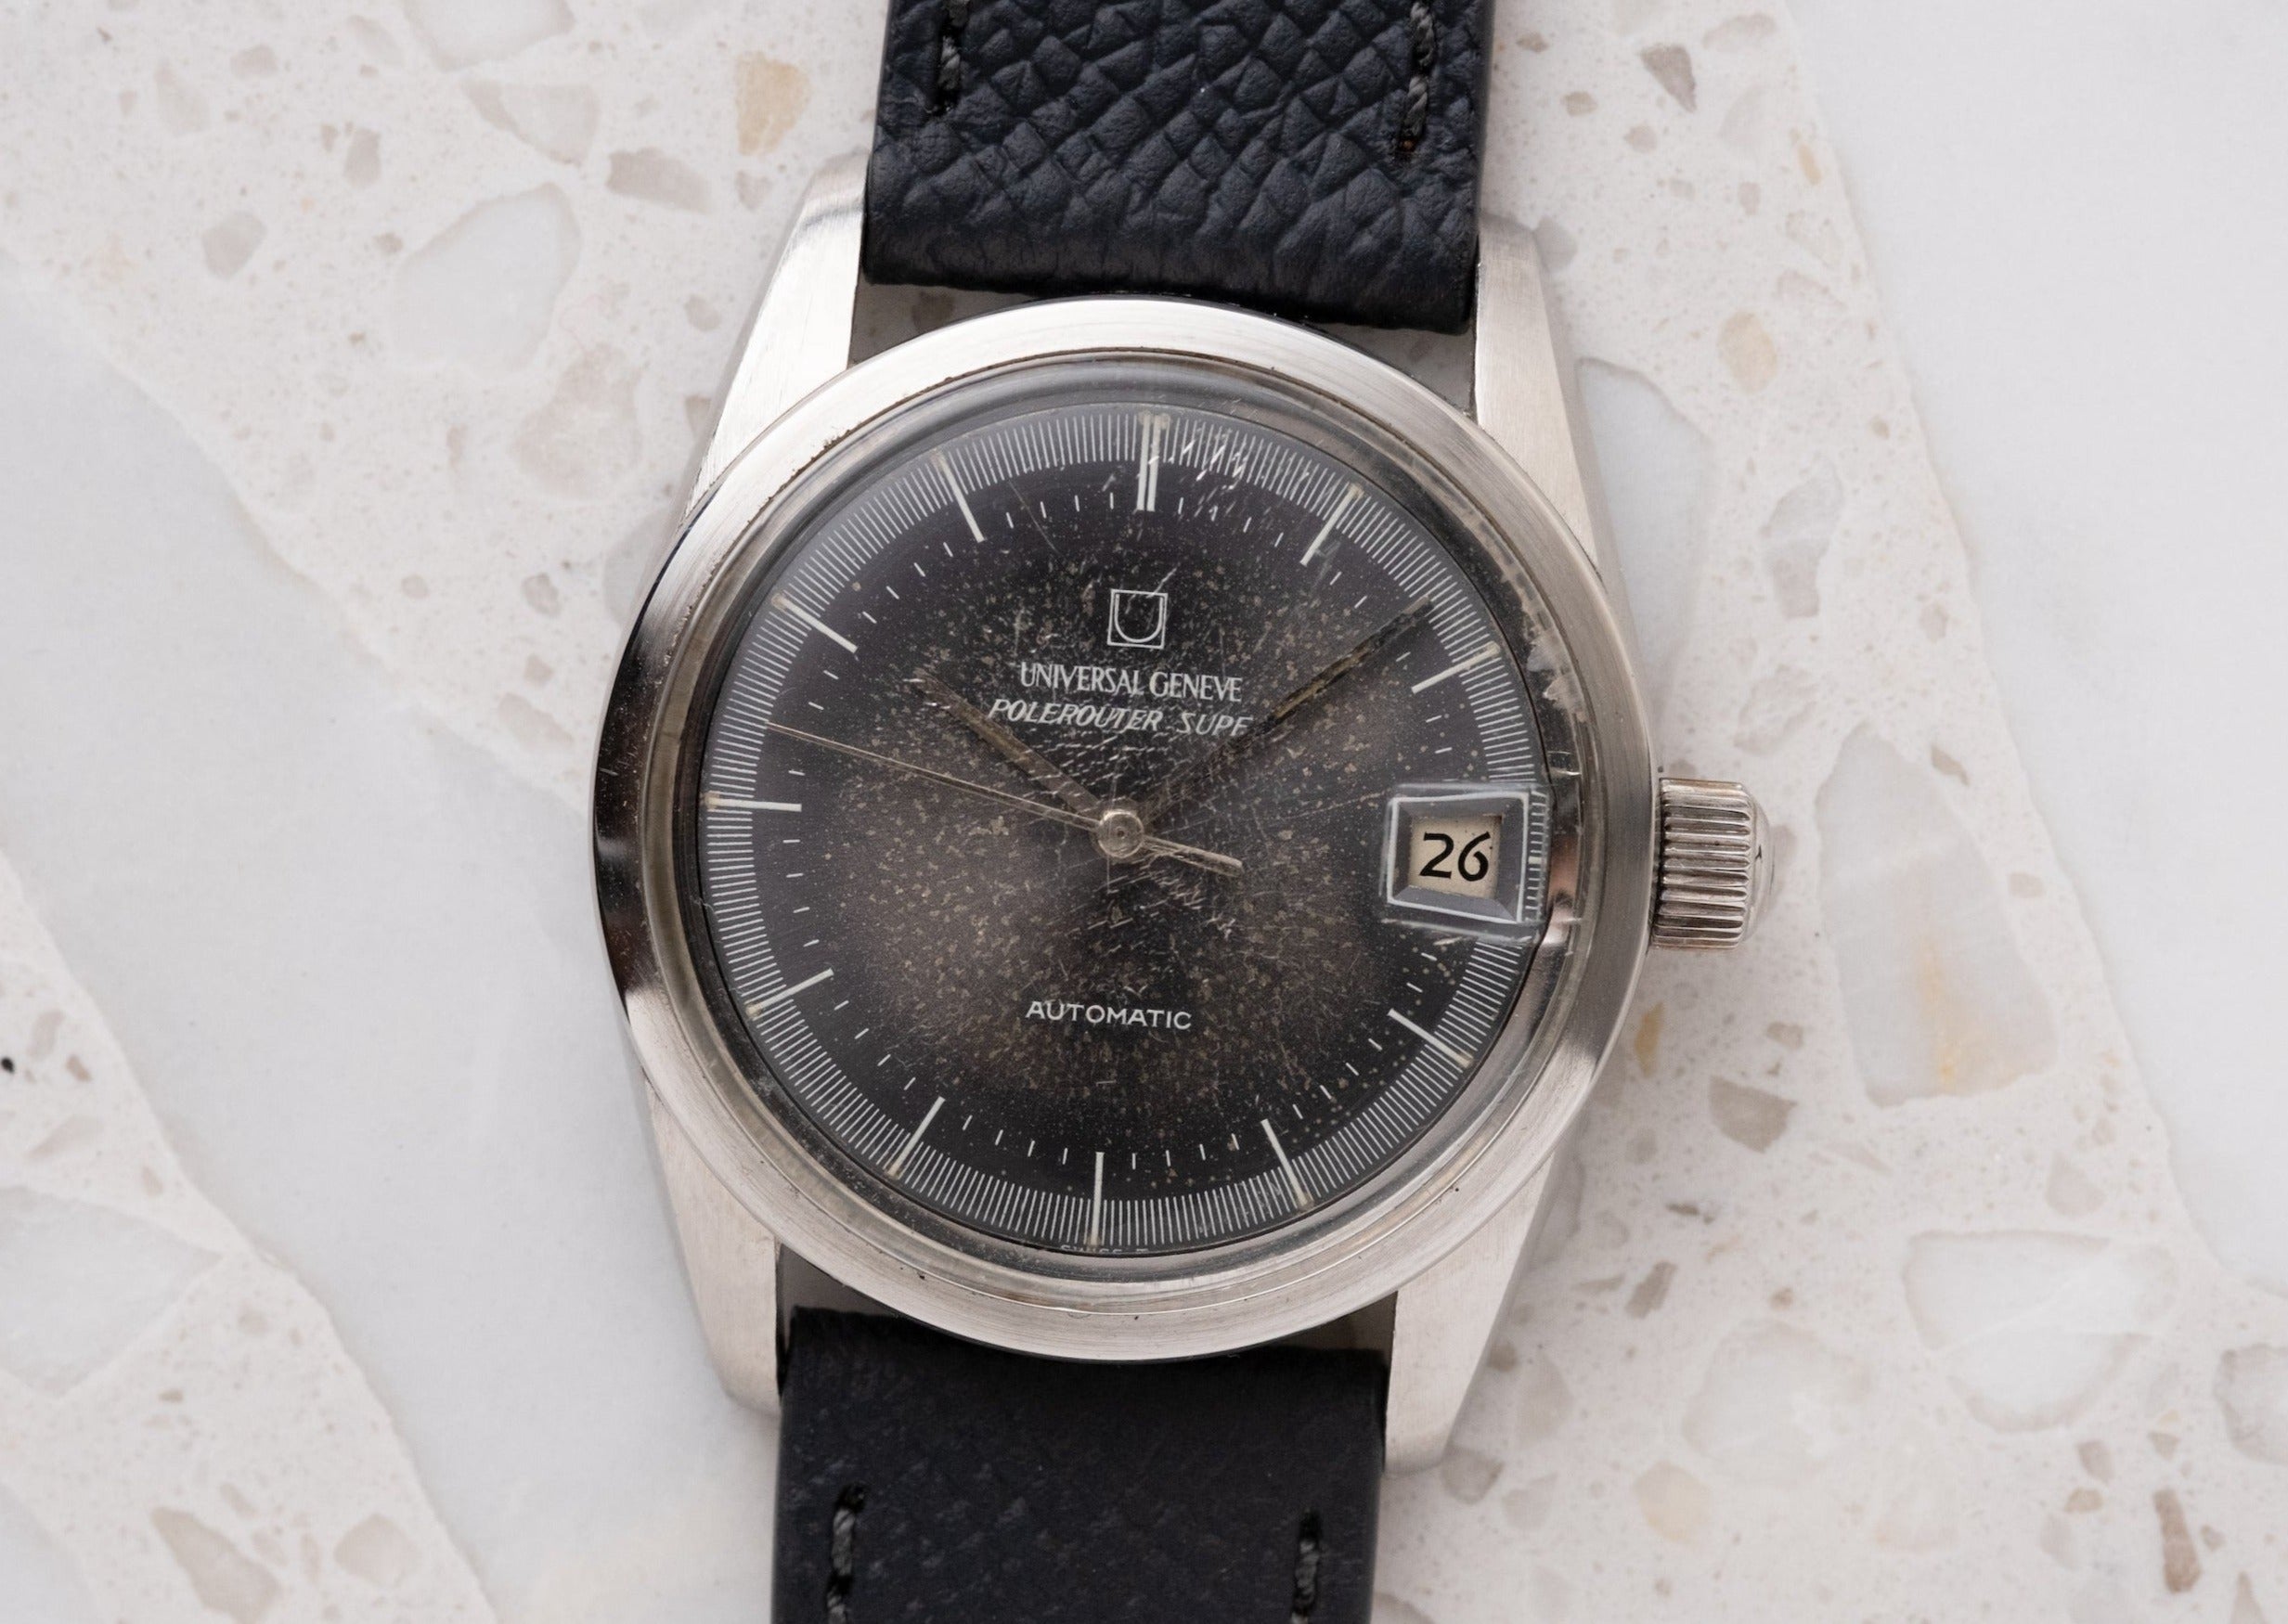 UNIVERSAL GENEVE Polerouter Super Tropical Dial Ref. 869112 / 26 (1966)